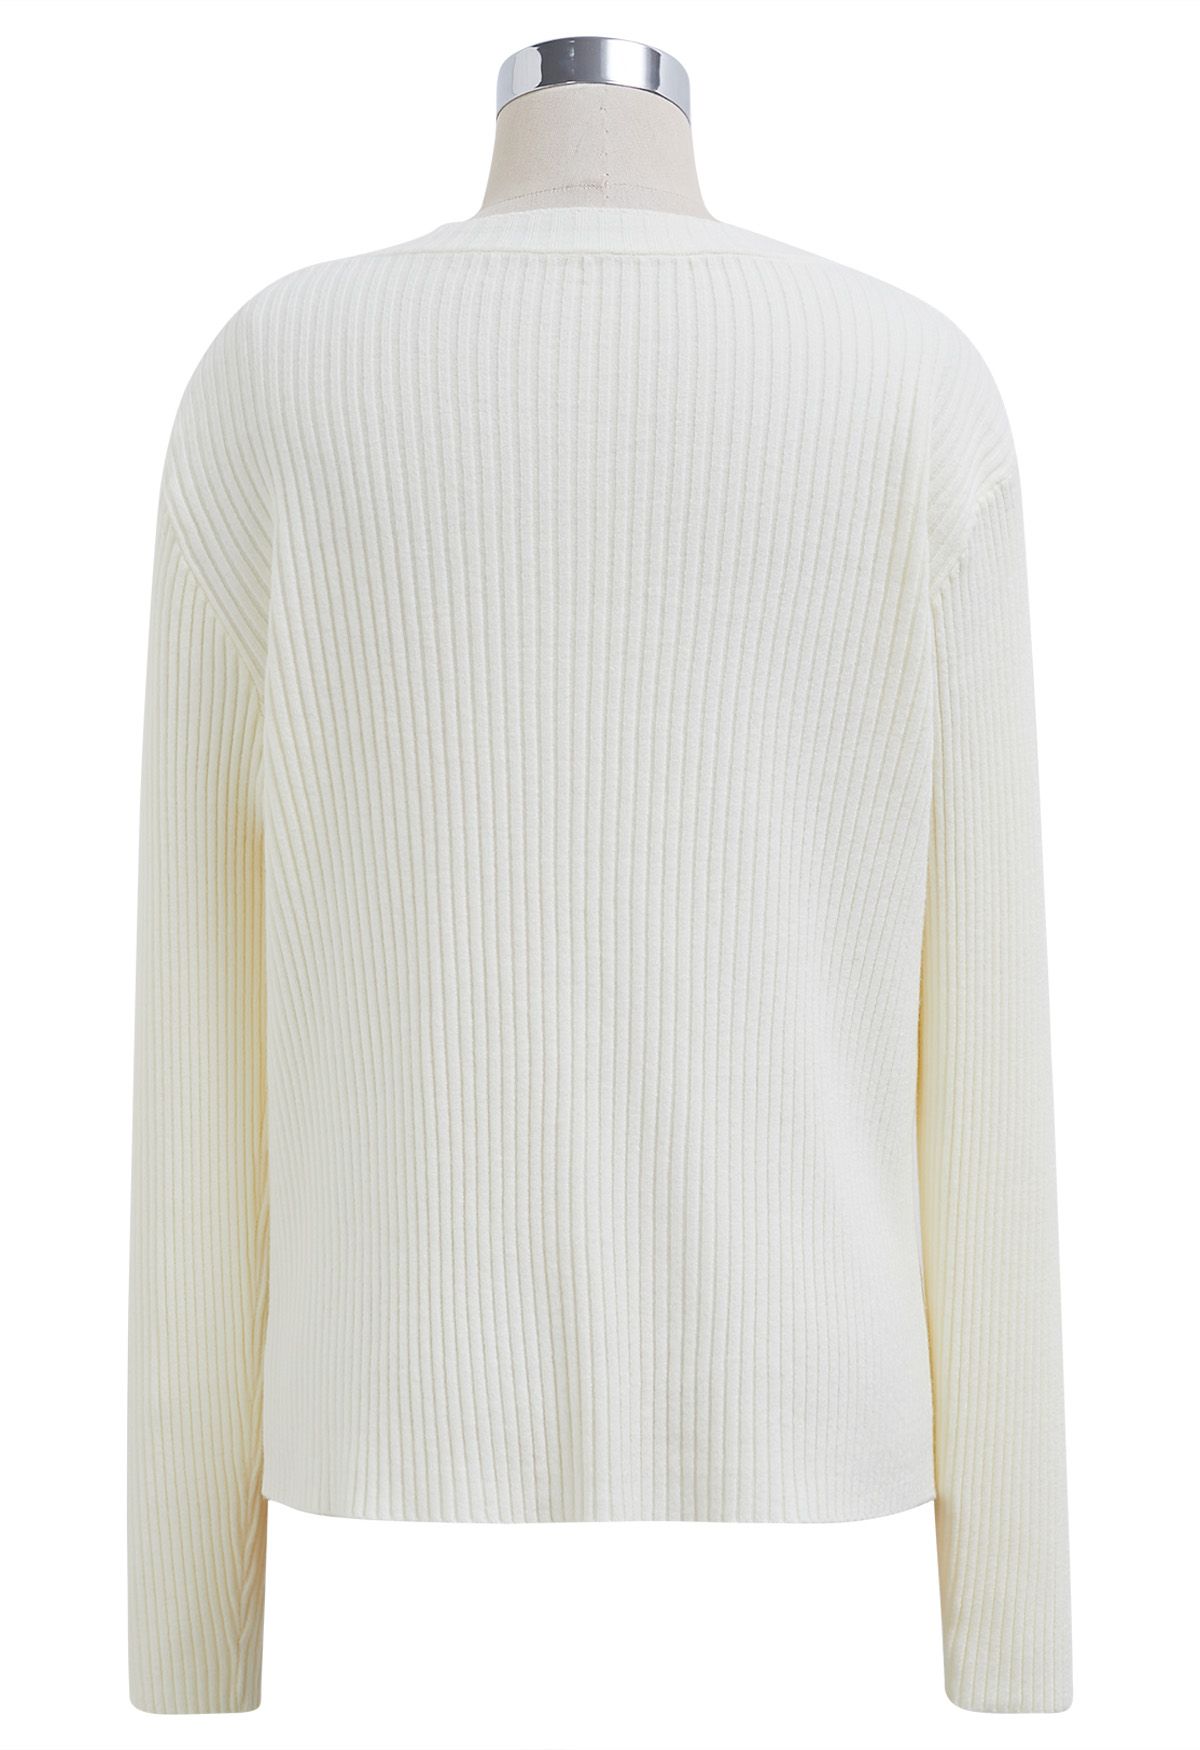 Versatile Button Front Ribbed Knit Top in Ivory